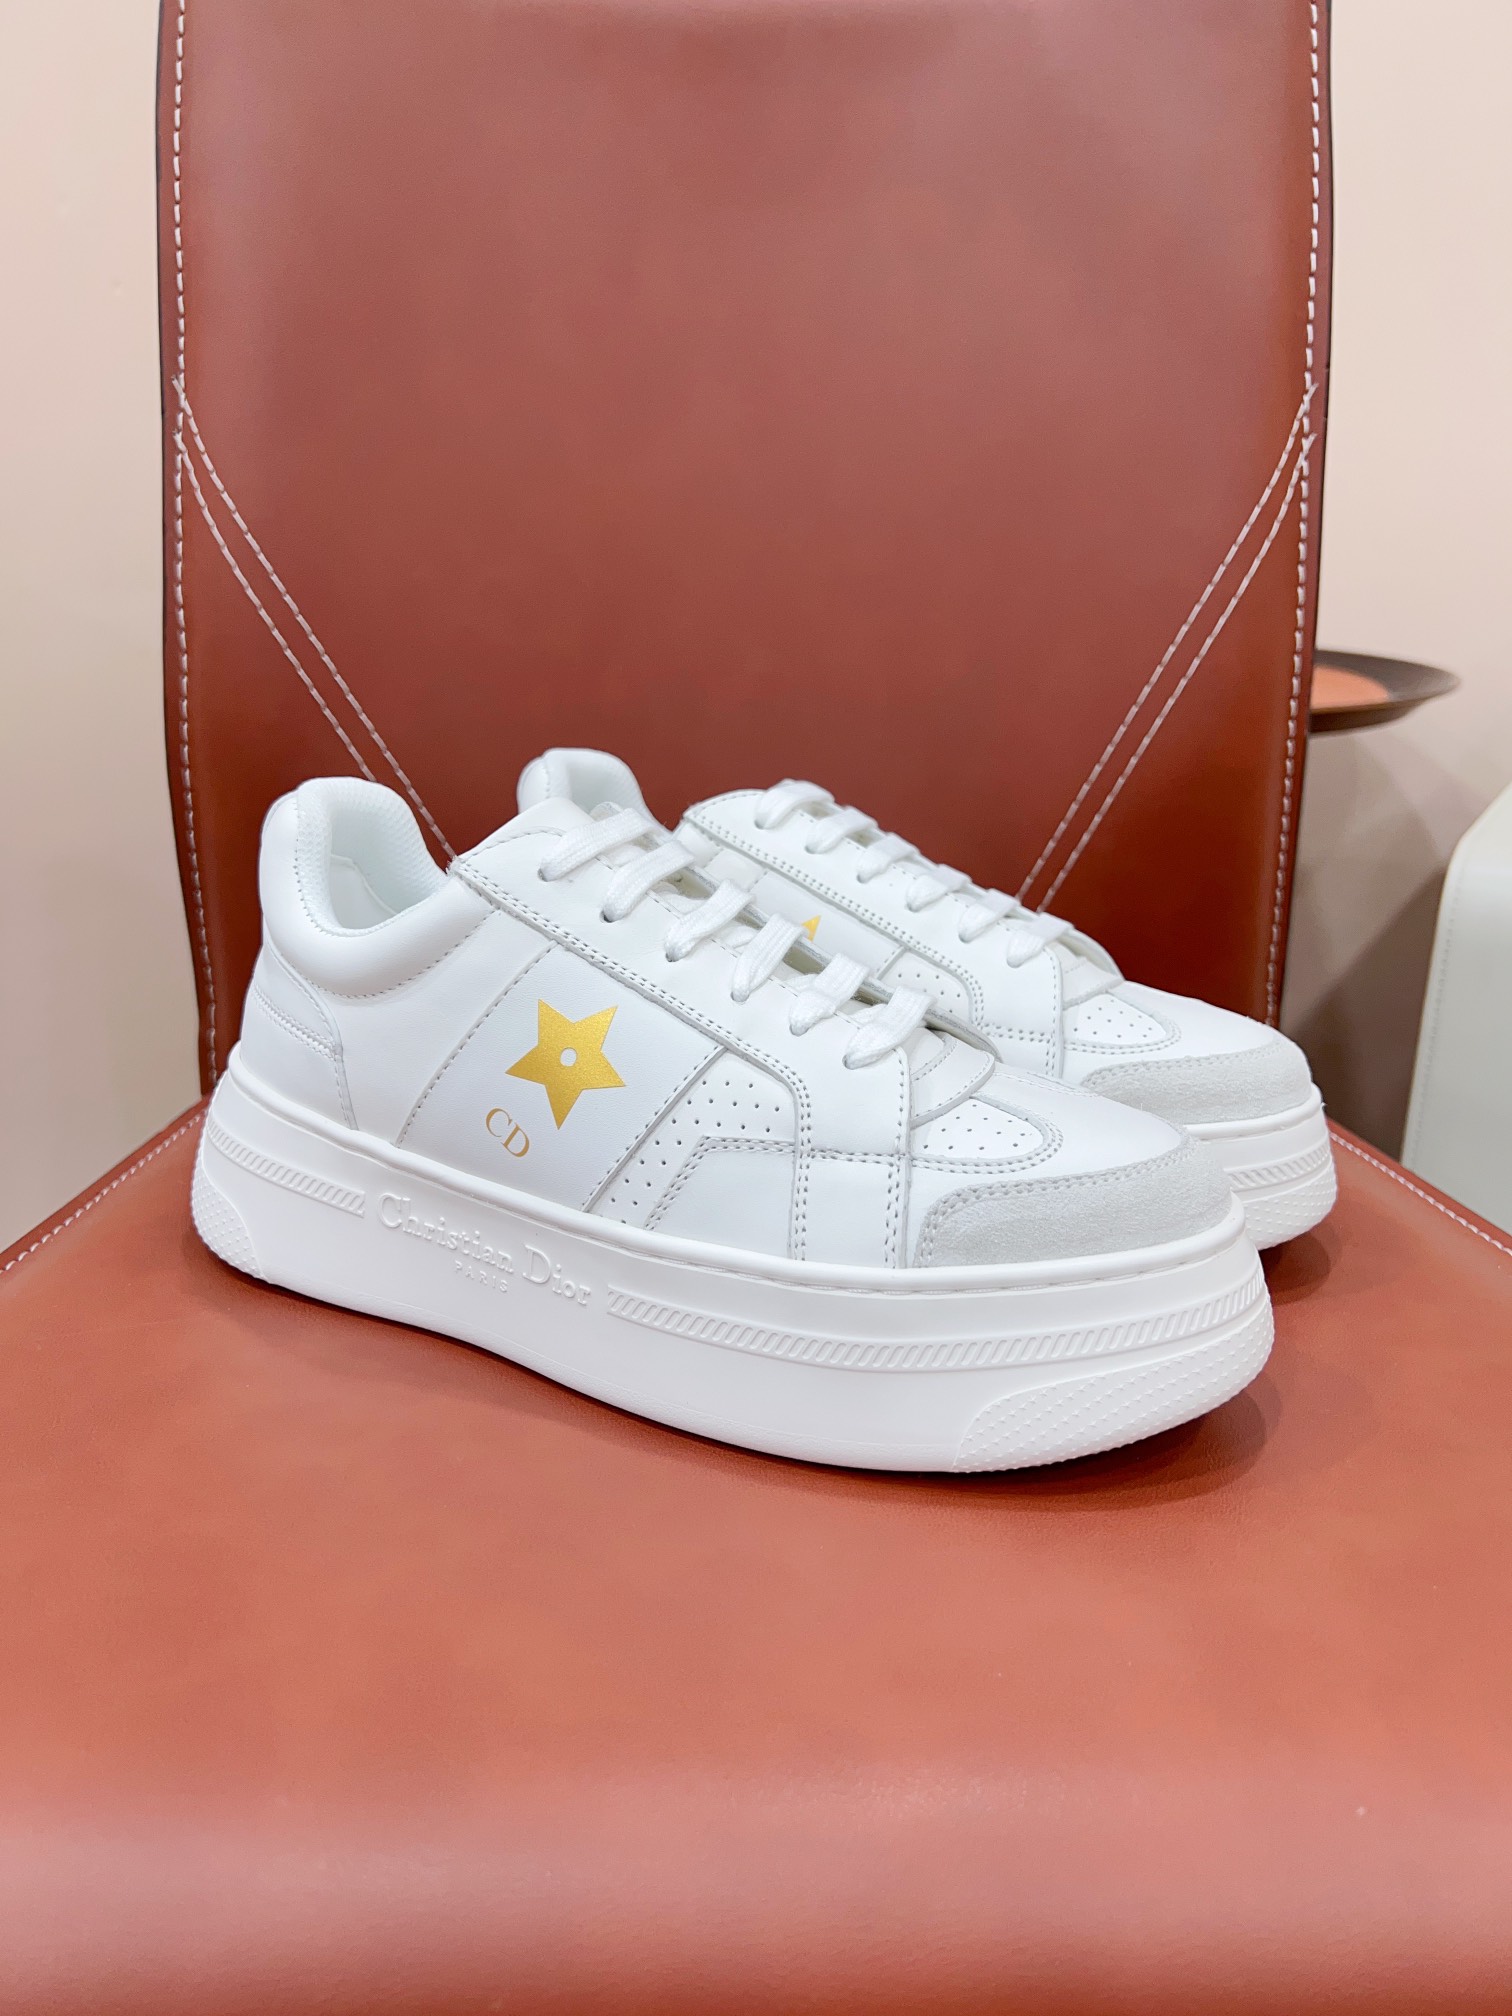 Dior Shoes Sneakers Cowhide Silk Casual